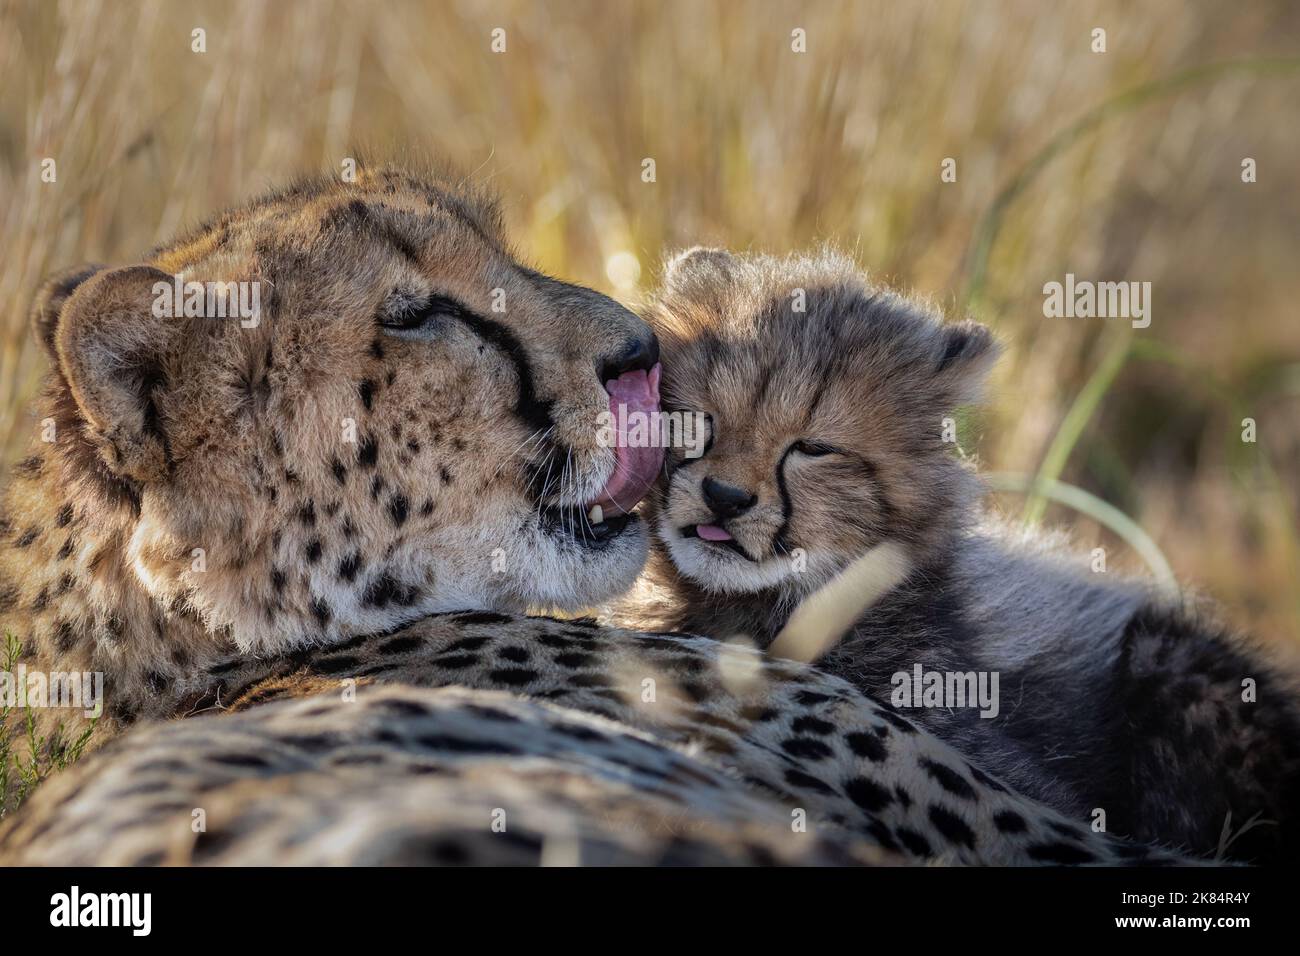 A cheetah mom with her young cub, photo was taken on a safari in South Africa Stock Photo